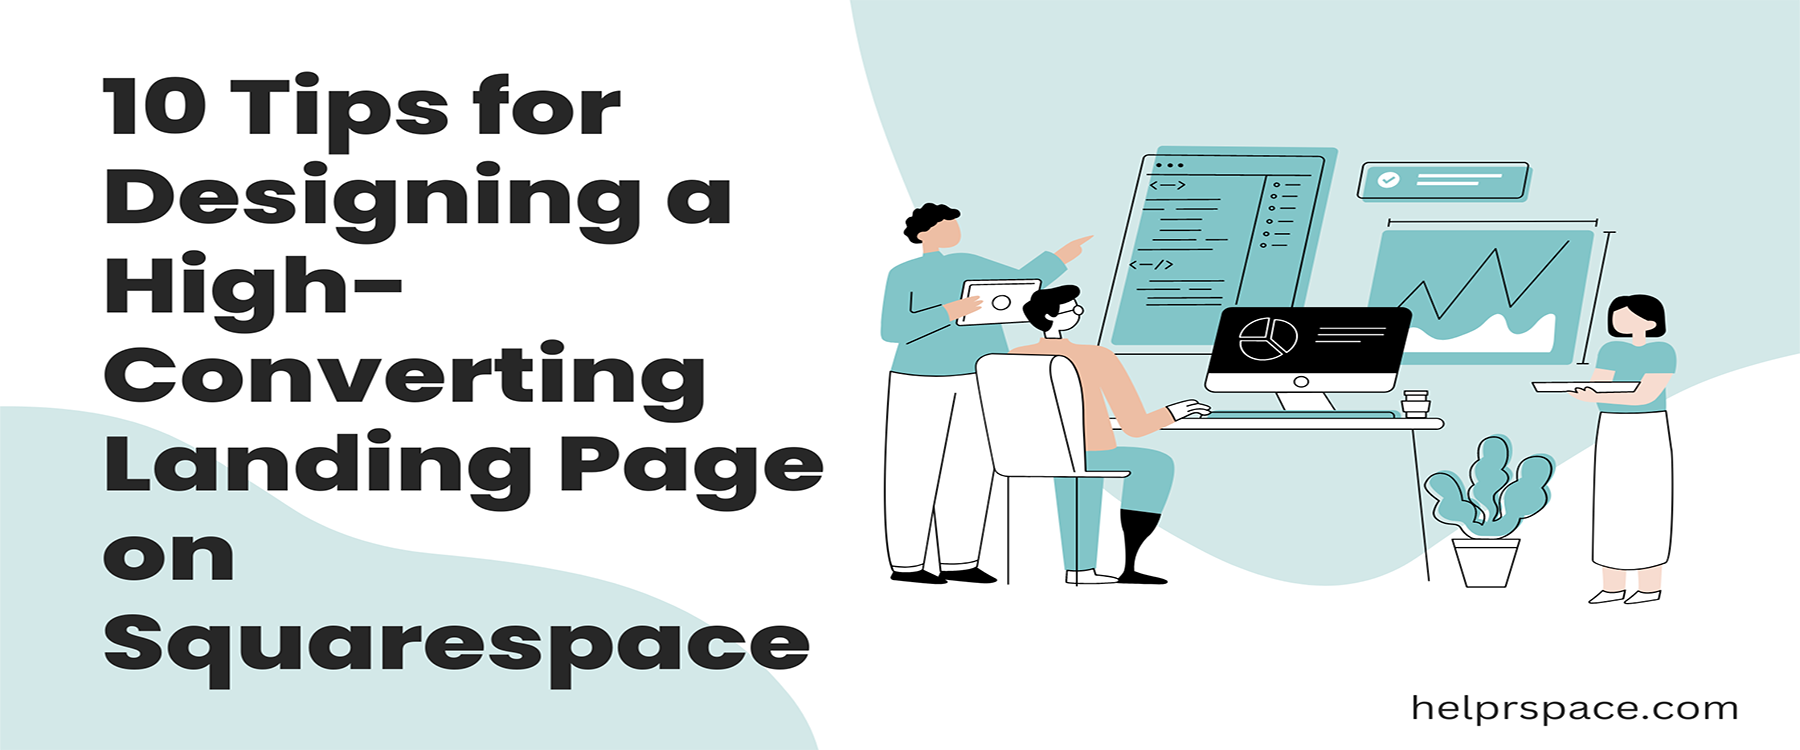 10 Tips for Designing a High-Converting Landing Page on Squarespace